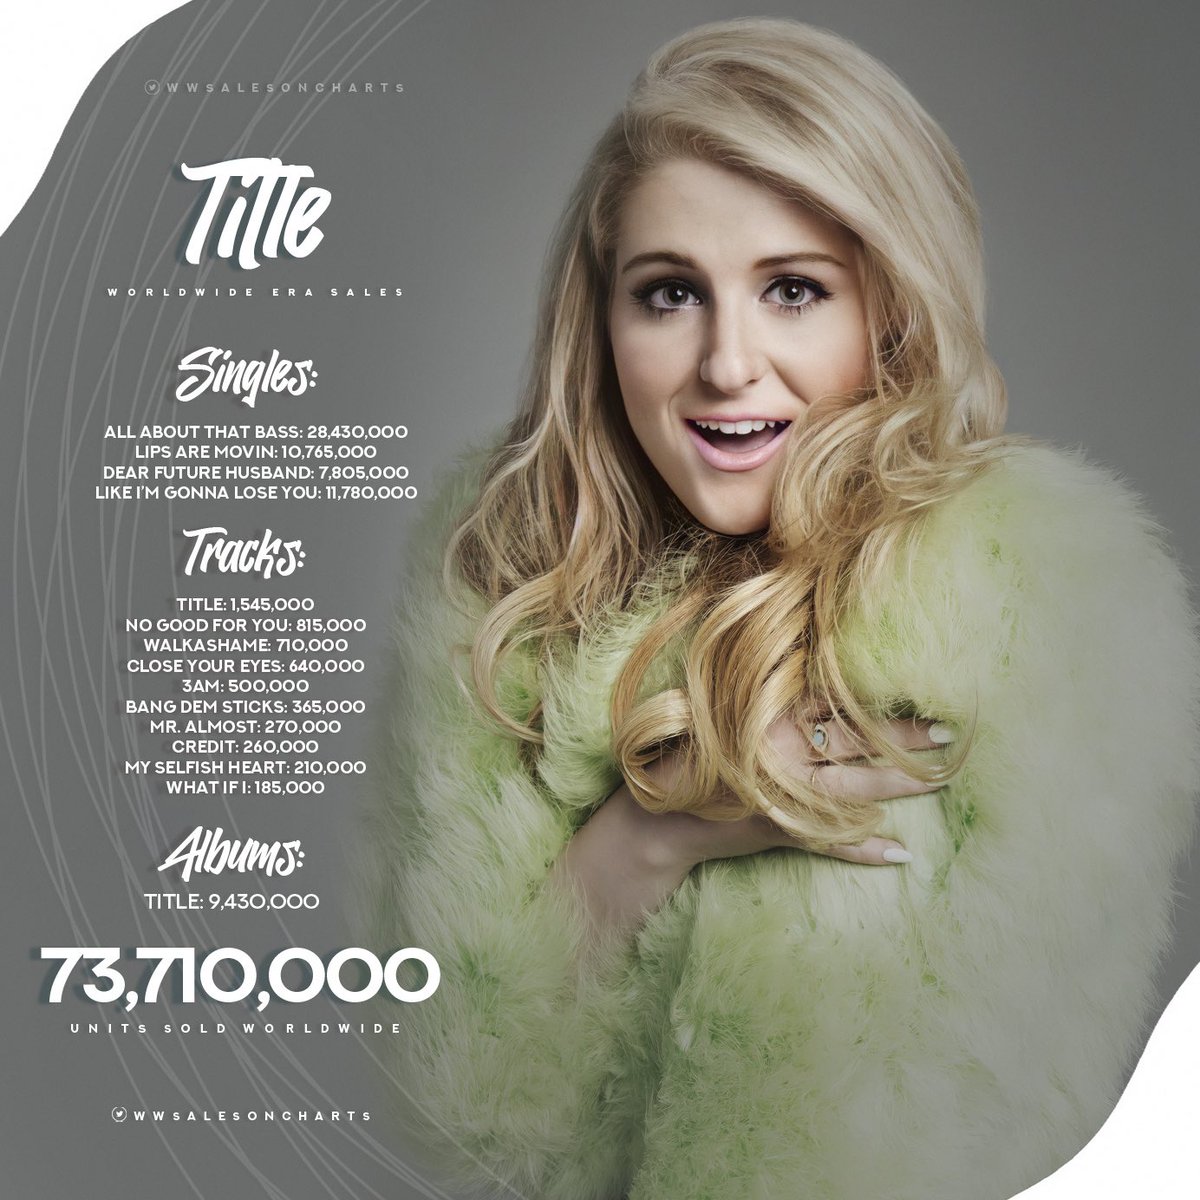 Meghan Trainor's All About That Bass is longest reigning UK single of 2014, UK charts